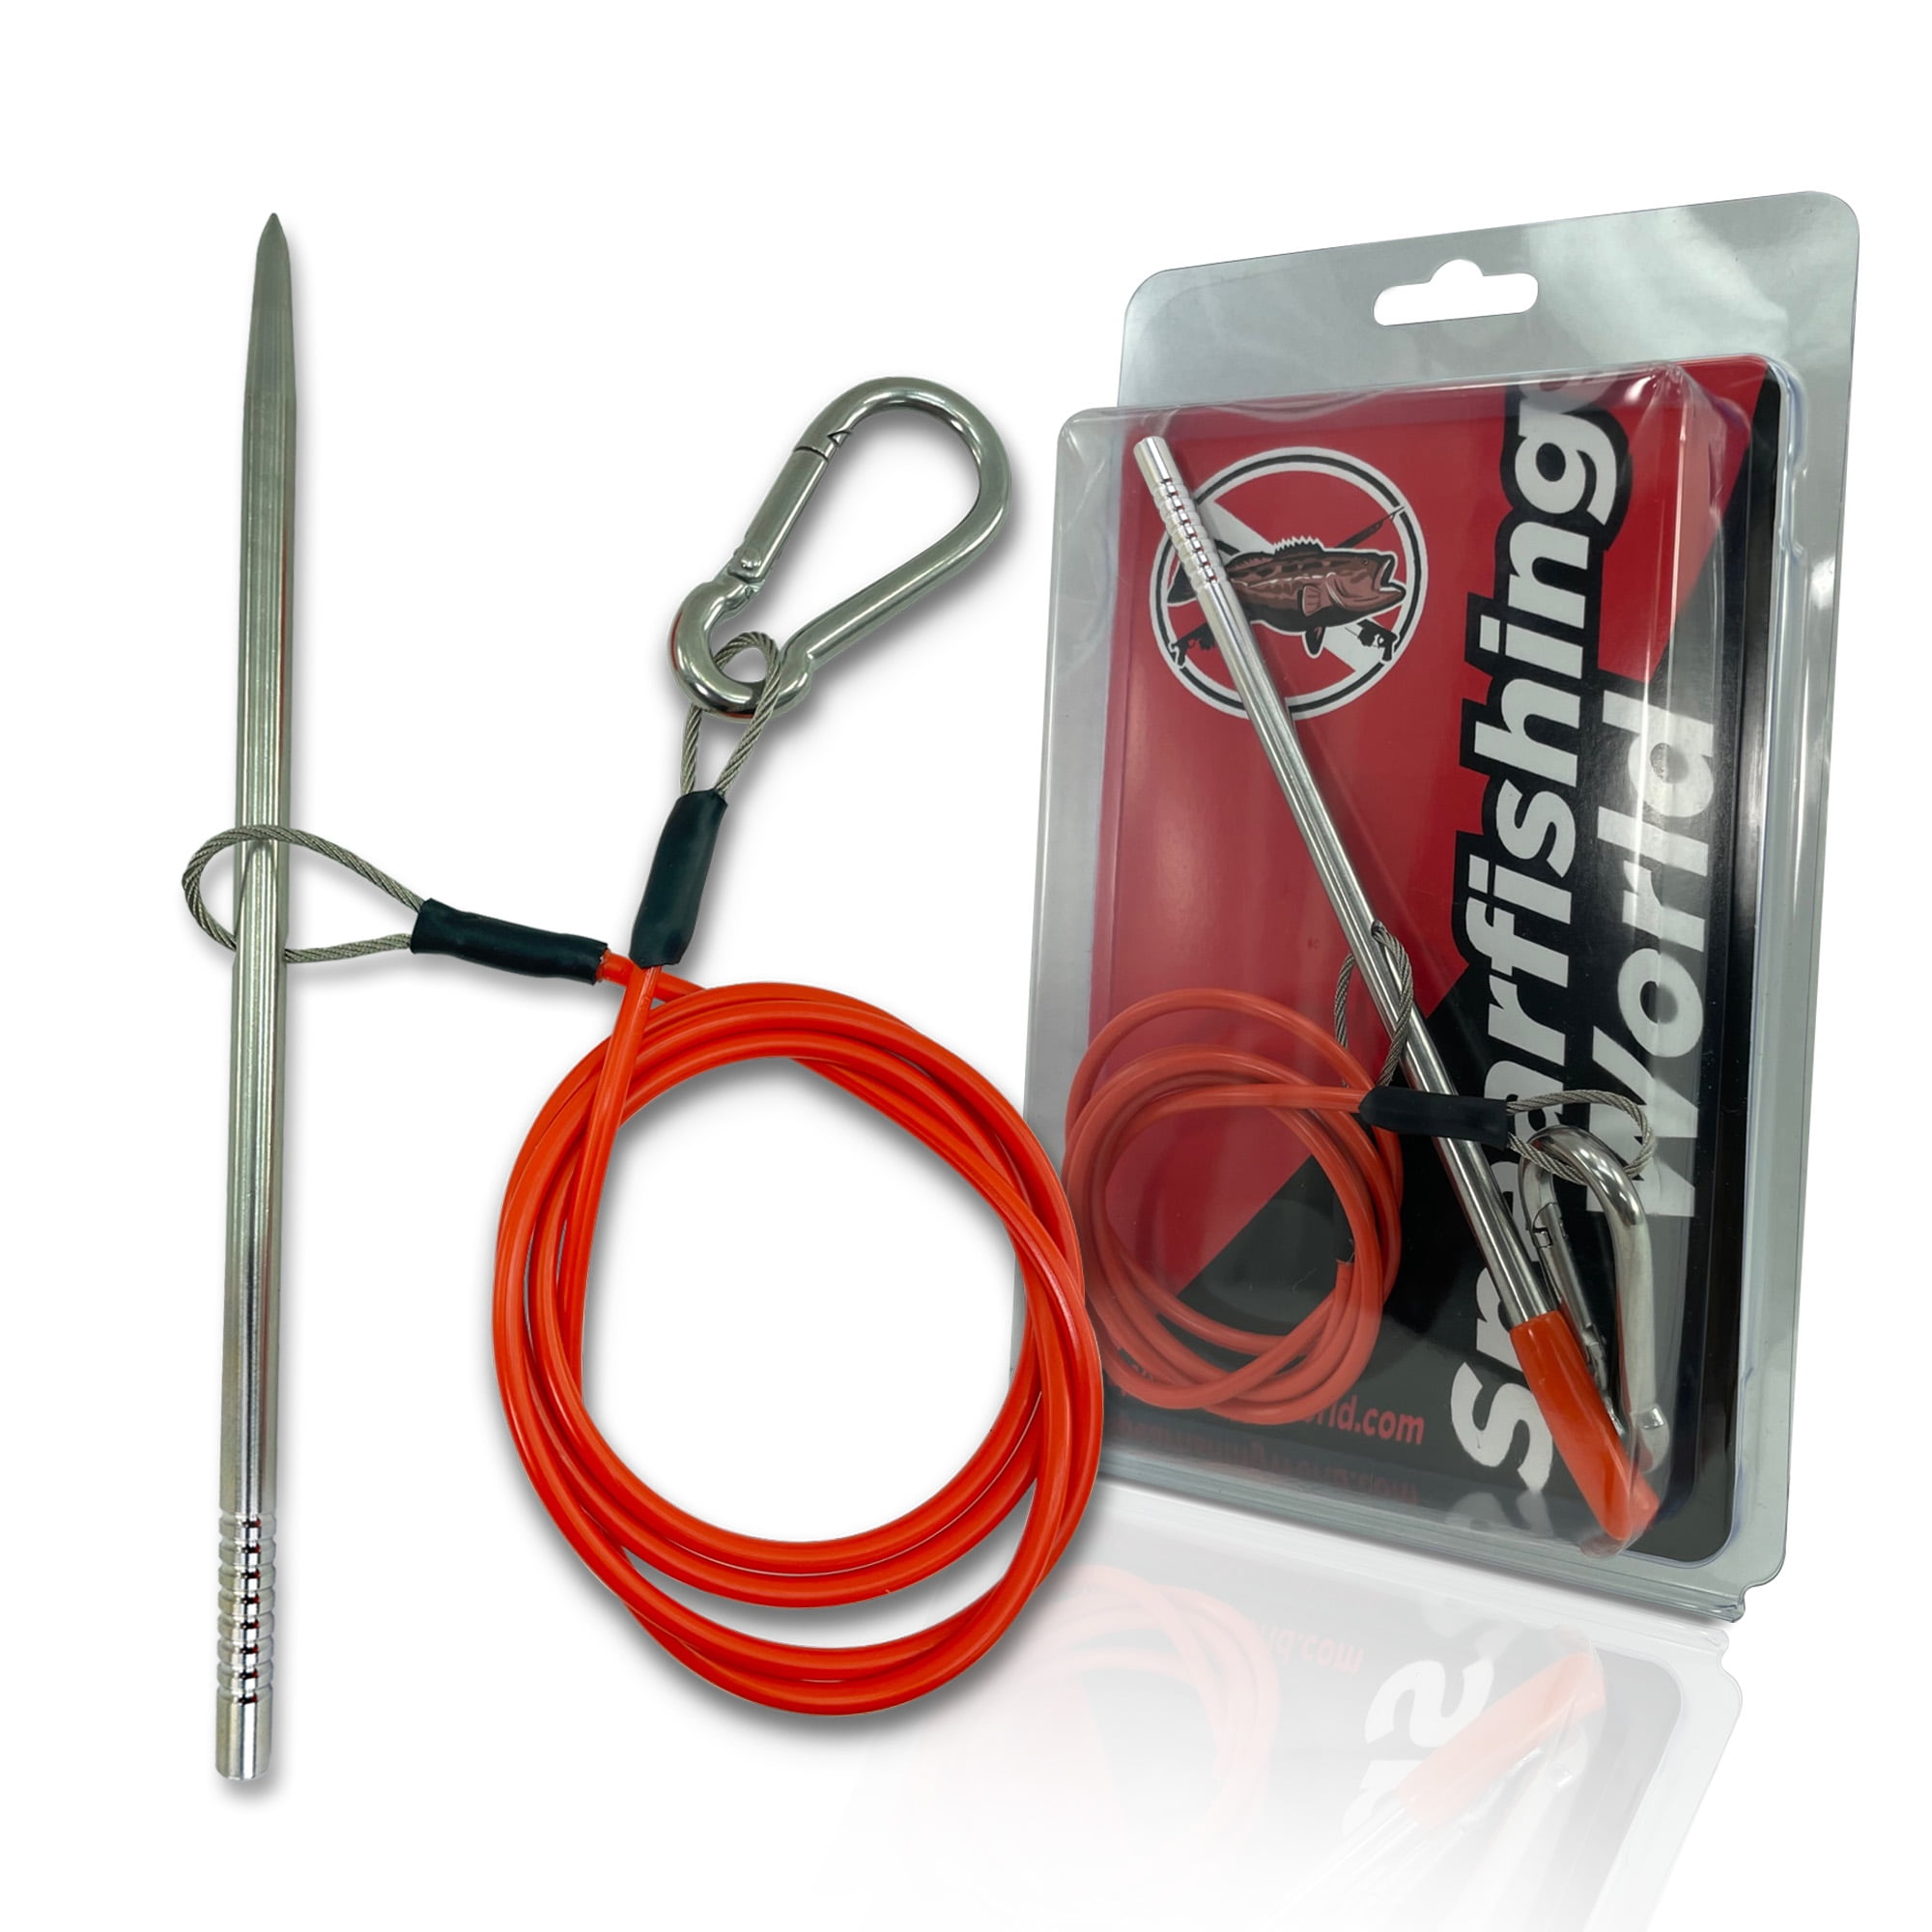 Fish Stringer for Spearfishing with Coated Stainless Steel Cable